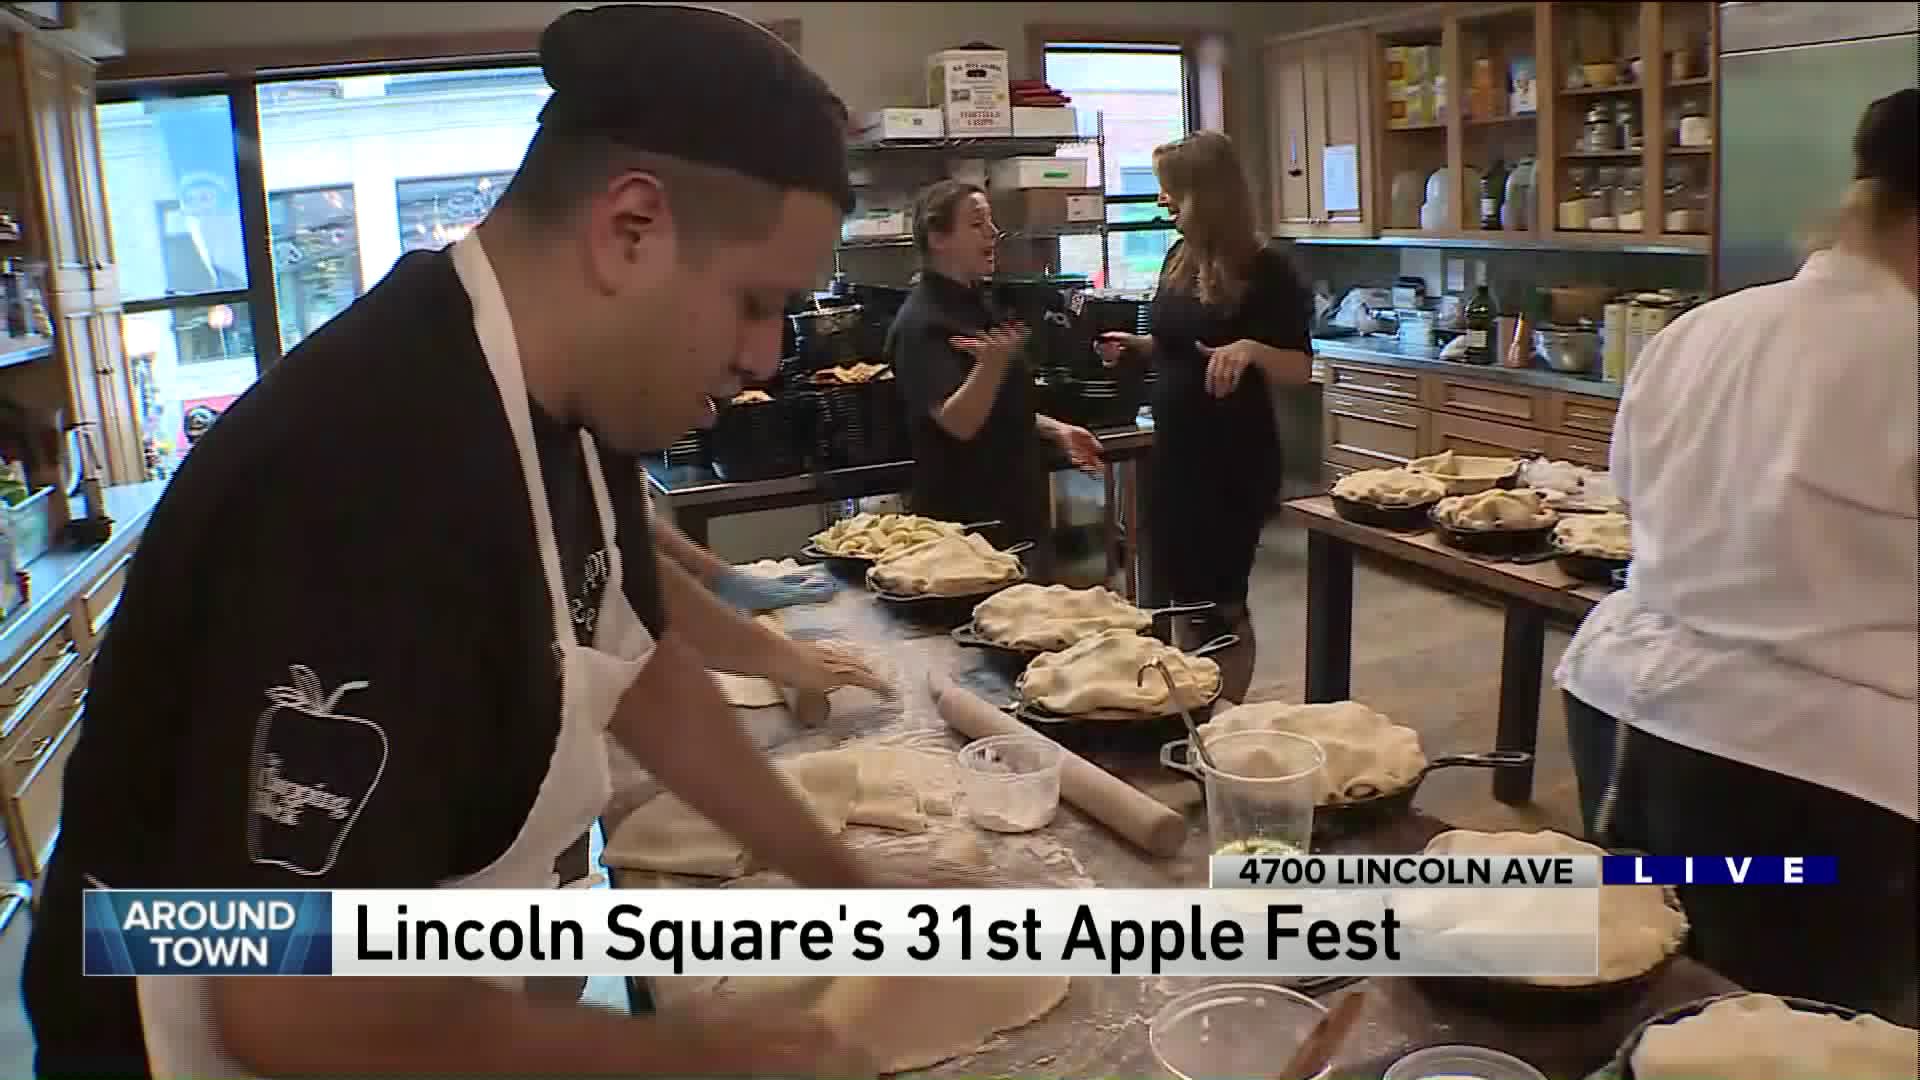 Around Town checks out Lincoln Square’s 31st Annual Apple Fest